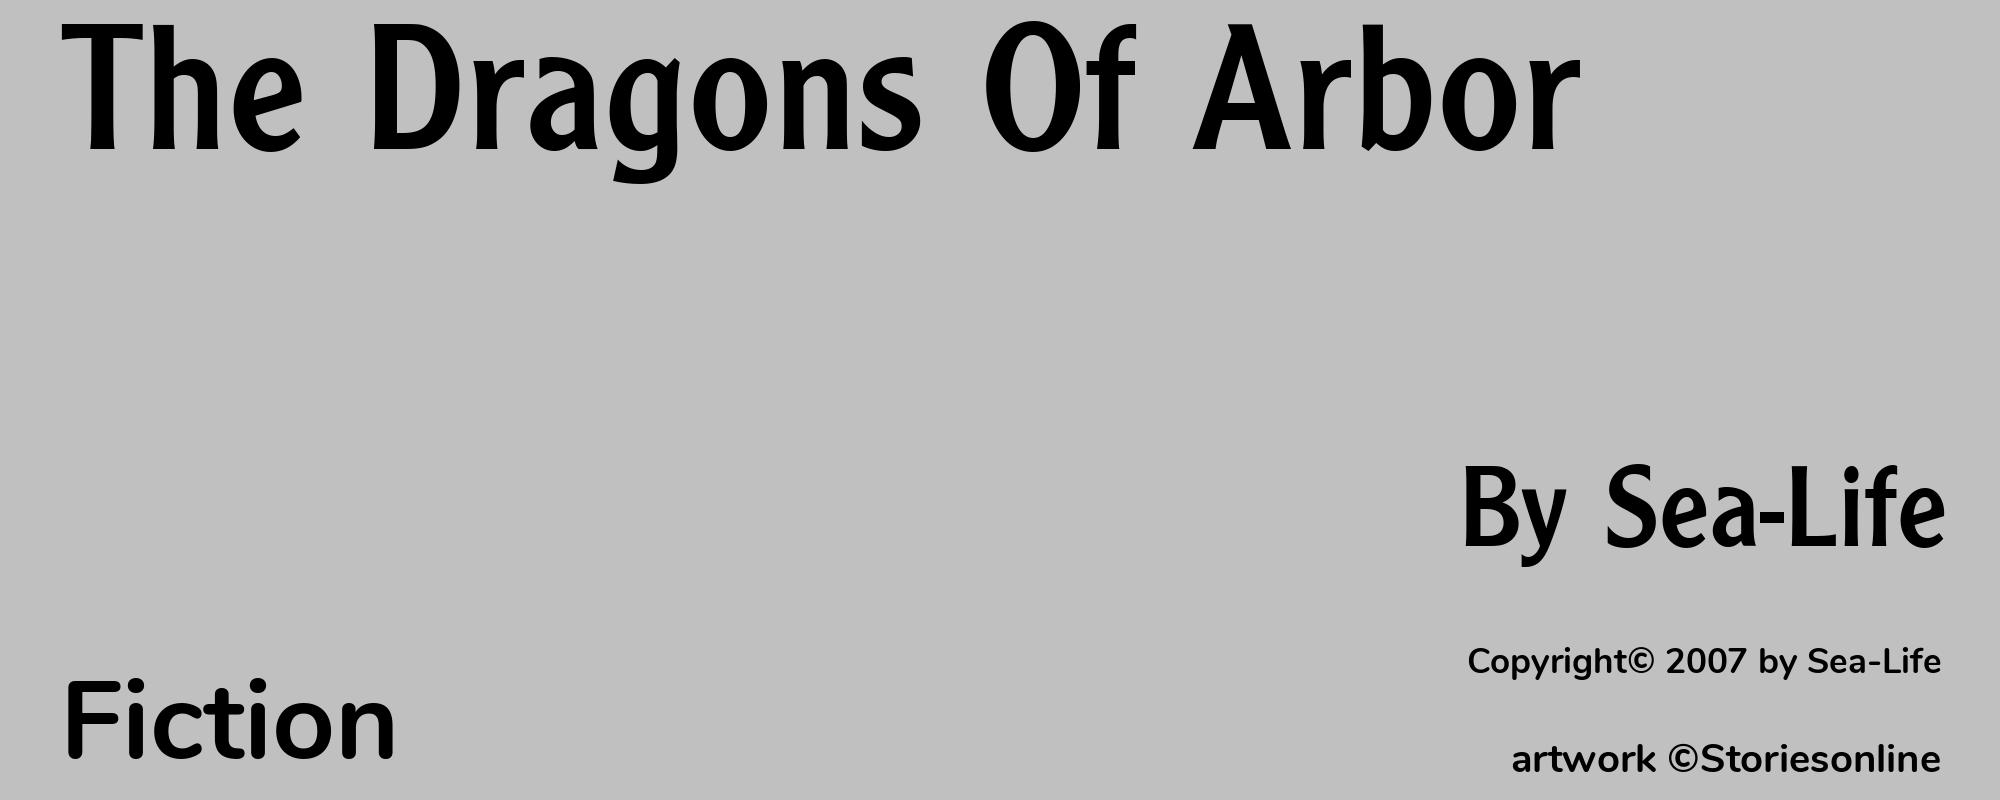 The Dragons Of Arbor - Cover